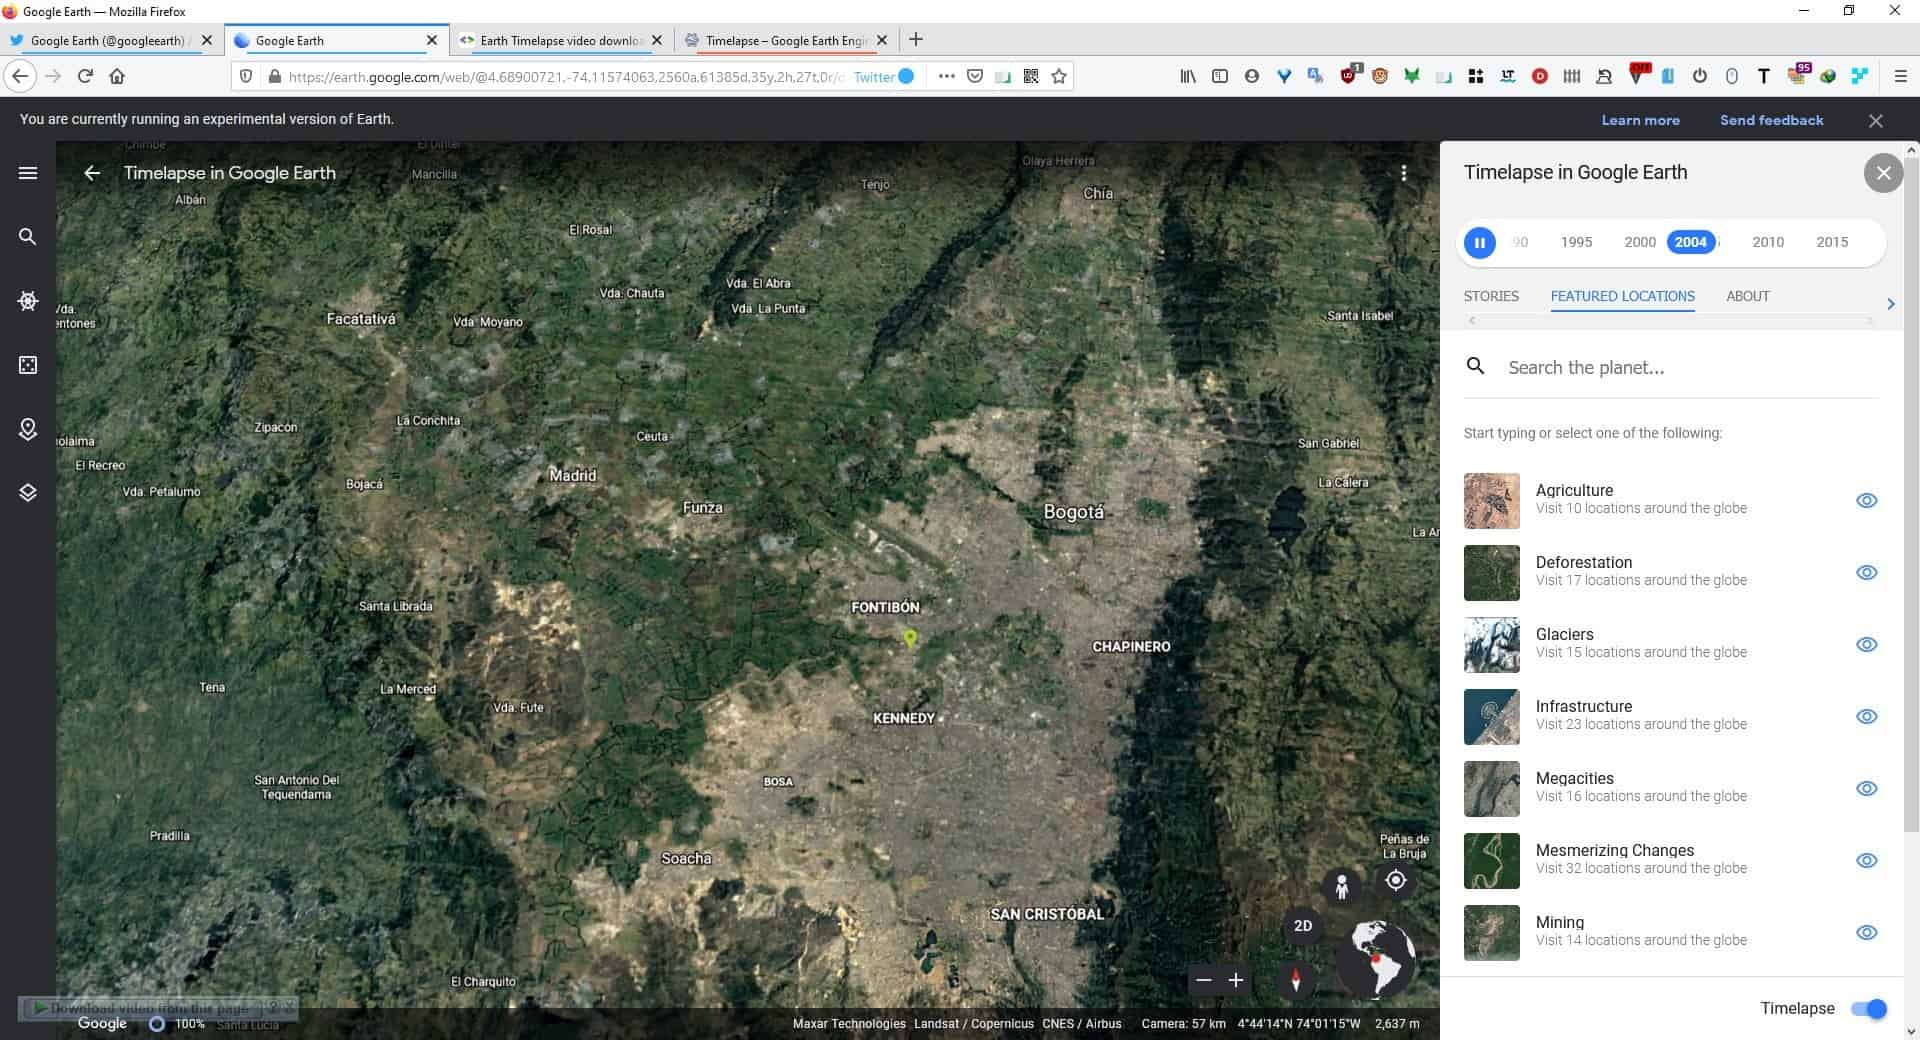 Google Earth Timelapse videos featured locations